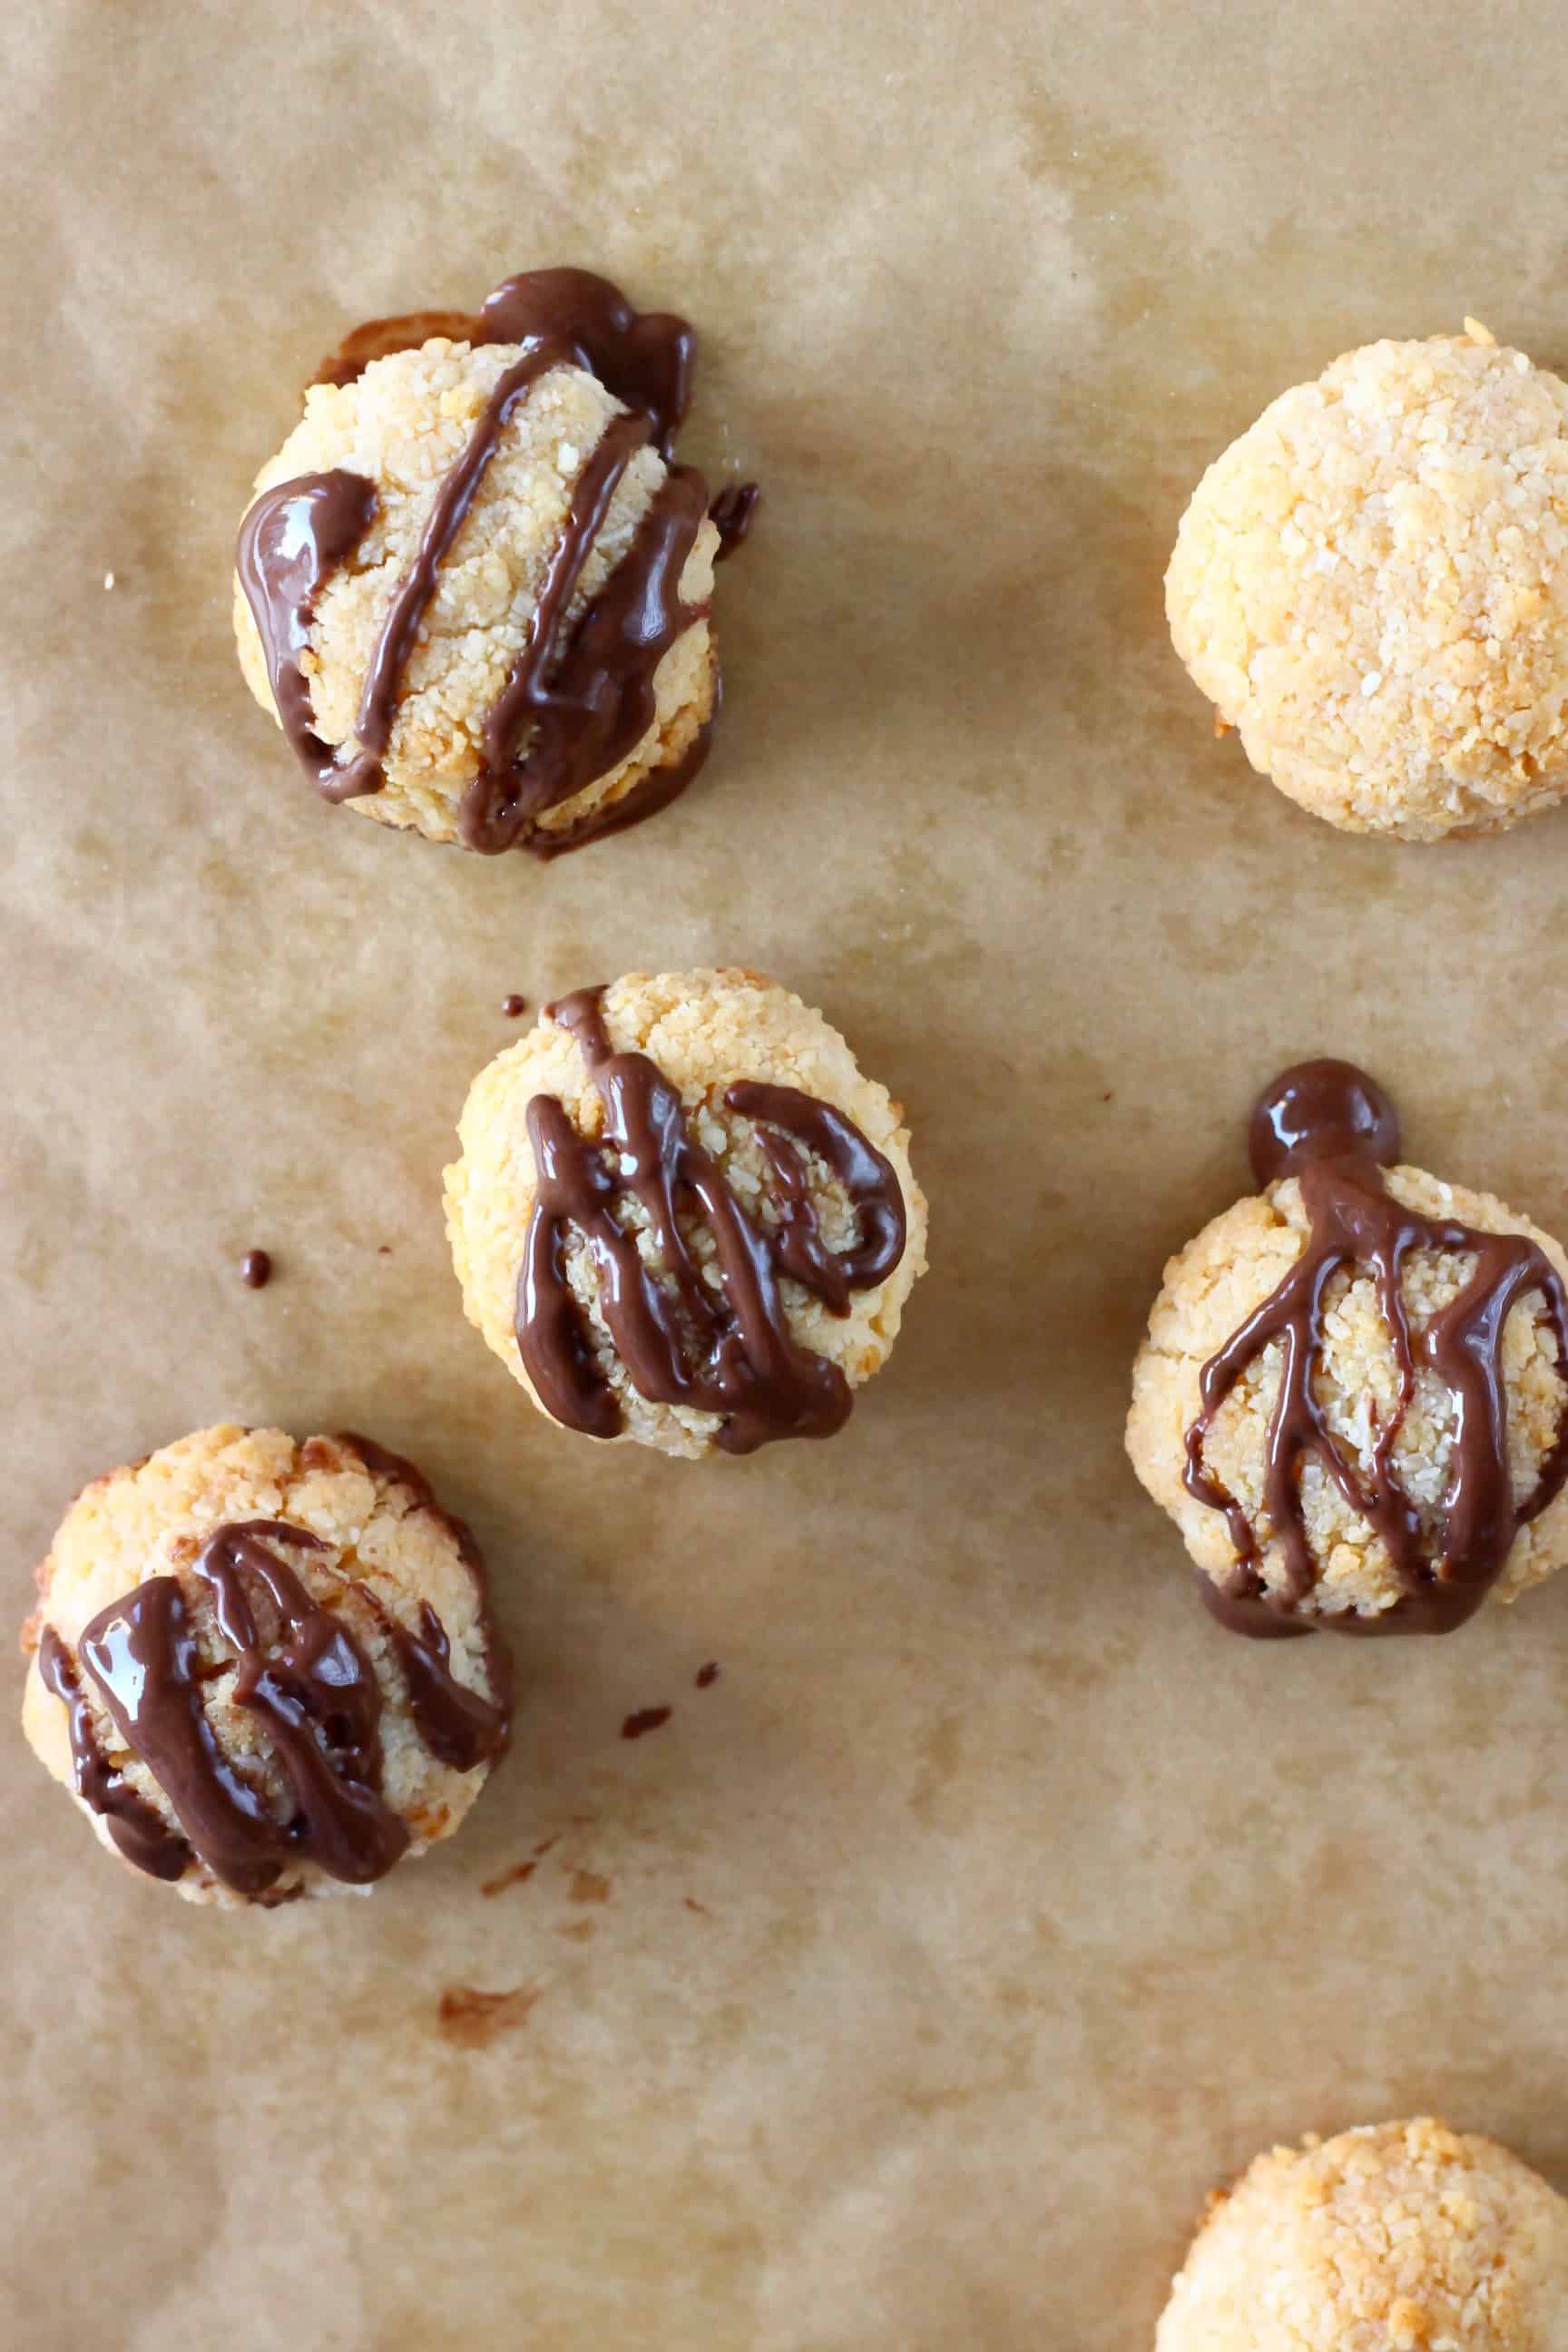 Six vegan macaroons drizzled with melted chocolate on a sheet of brown baking paper